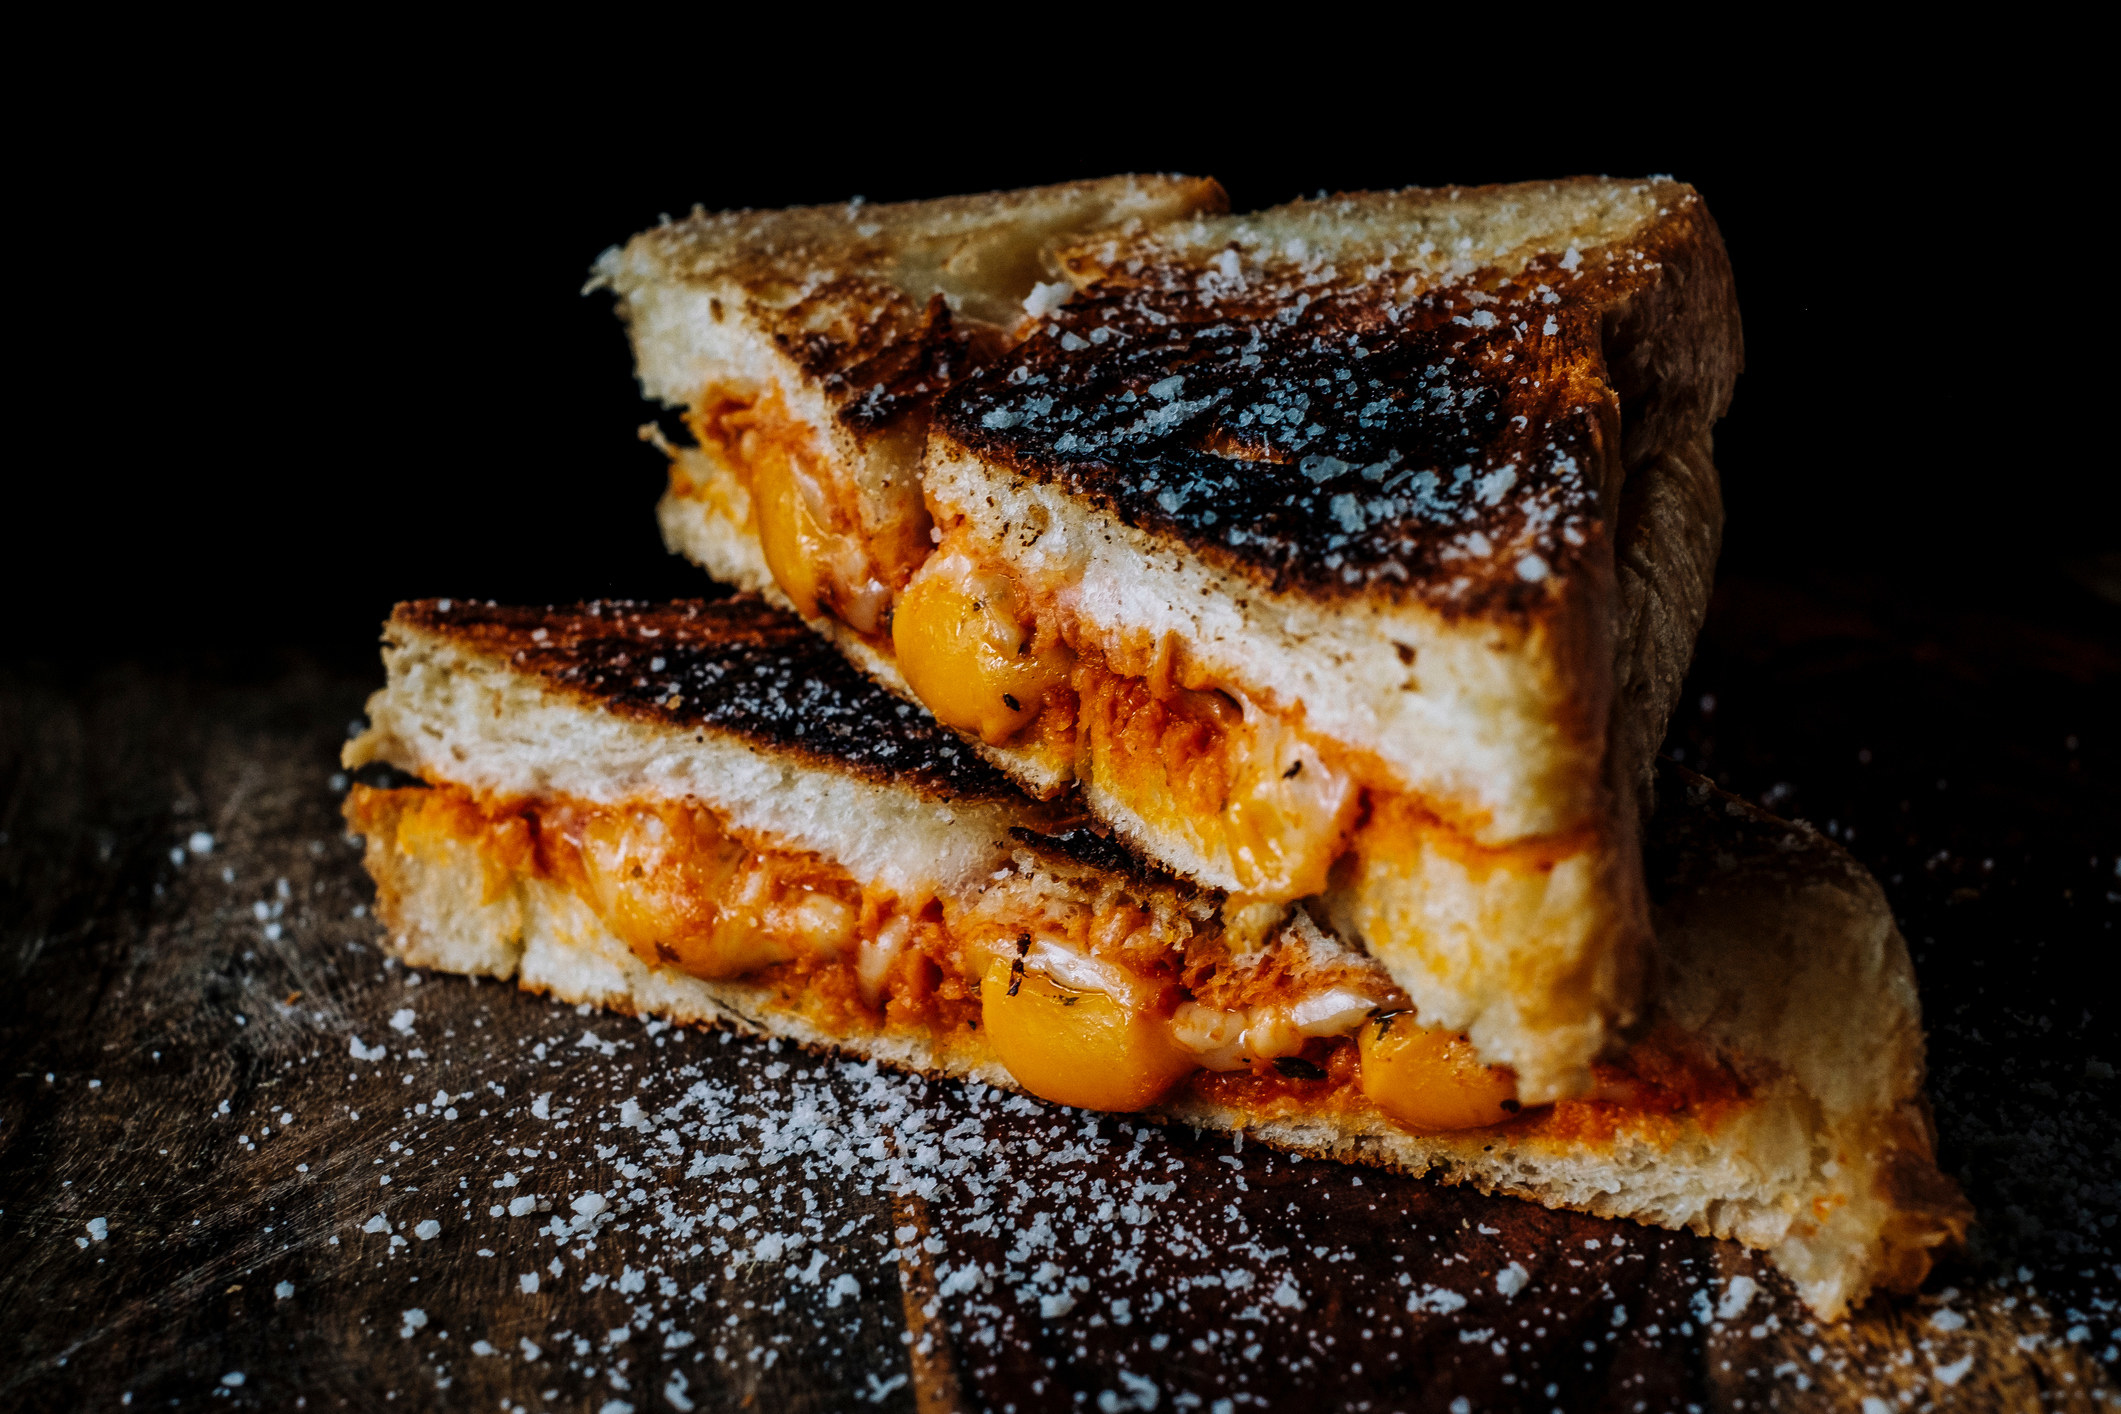 A charred grilled cheese sandwich with salt sprinkled on top